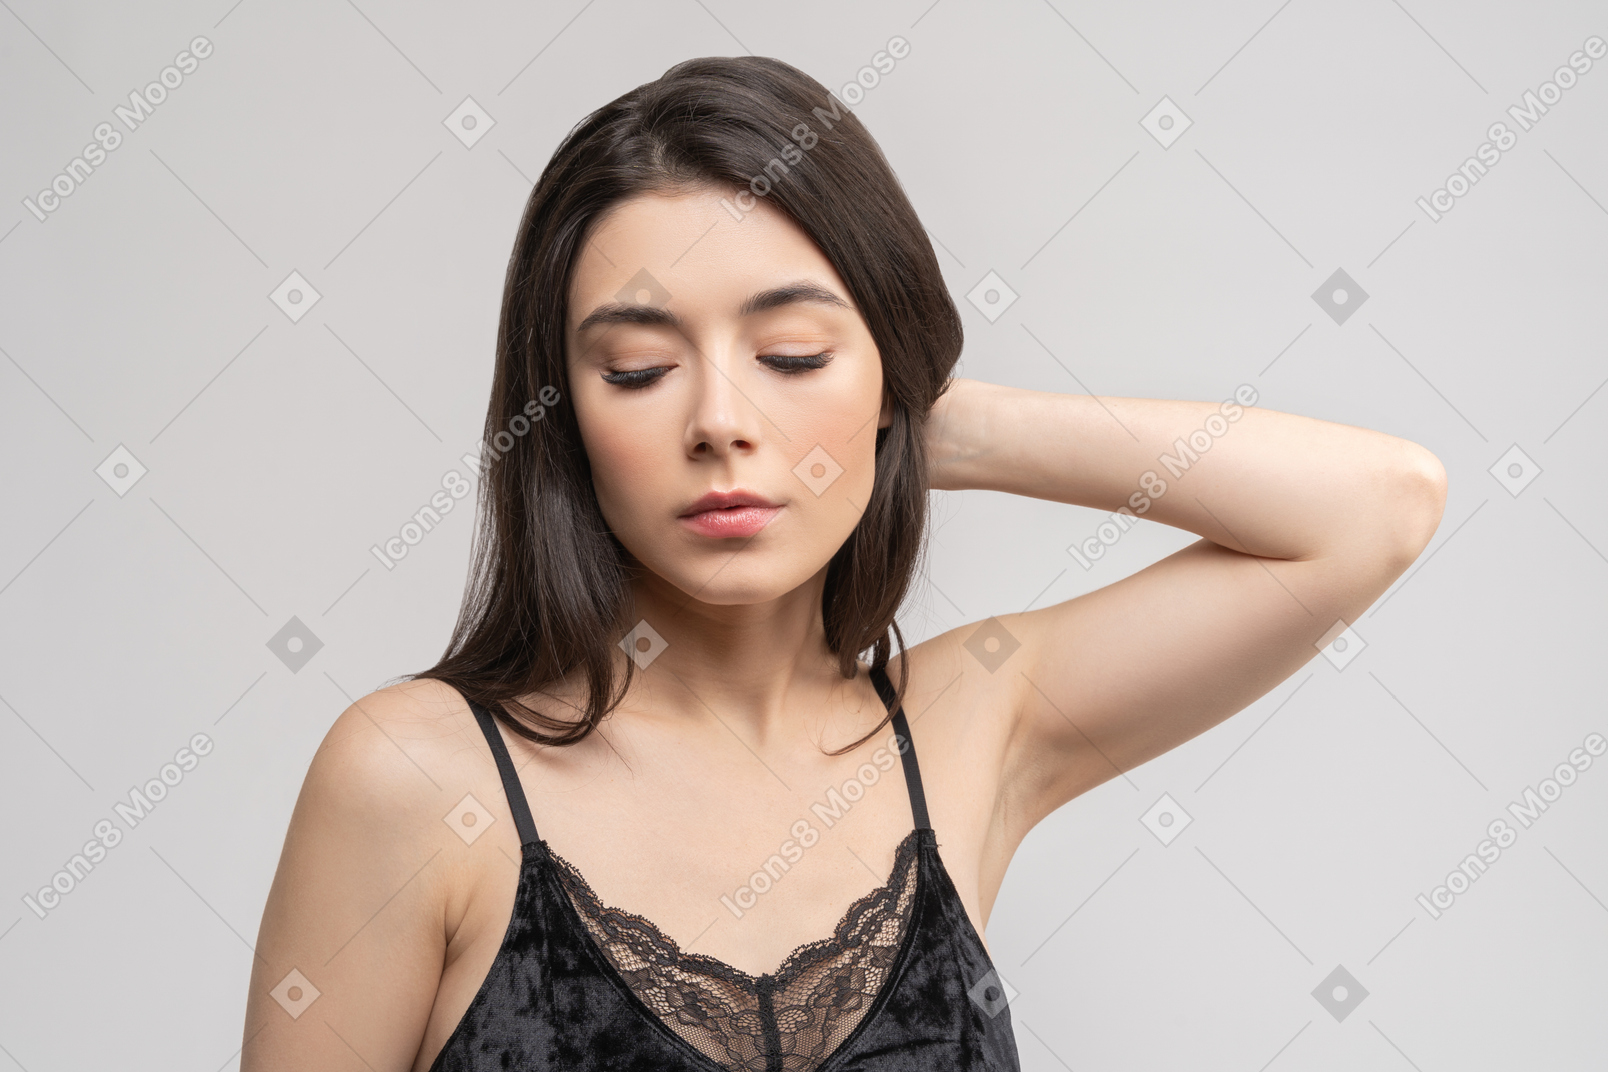 Young woman keeping eyes closed and touching her head